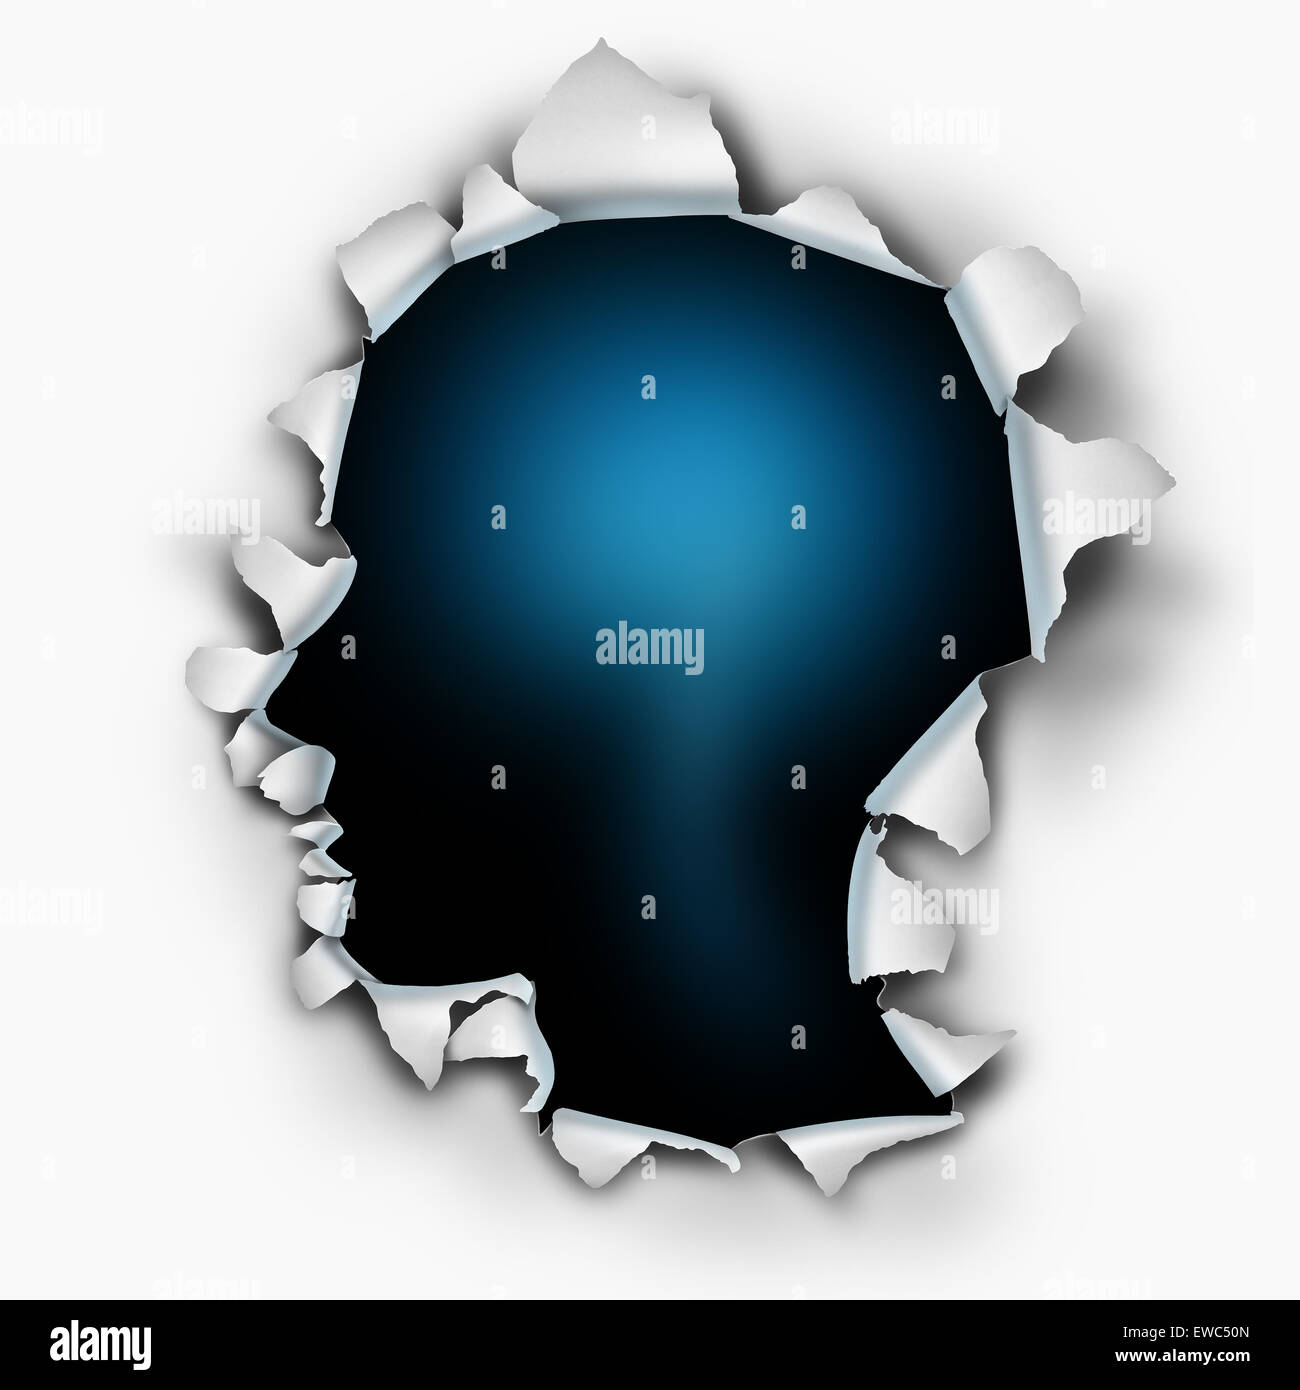 Inside of you human thinking concept as a paper burst hole with ripped torn edges shaped as a head on a white sheet that has been punctured or punched open as a symbol for understanding the mind and brain function or feelings and emotion. Stock Photo